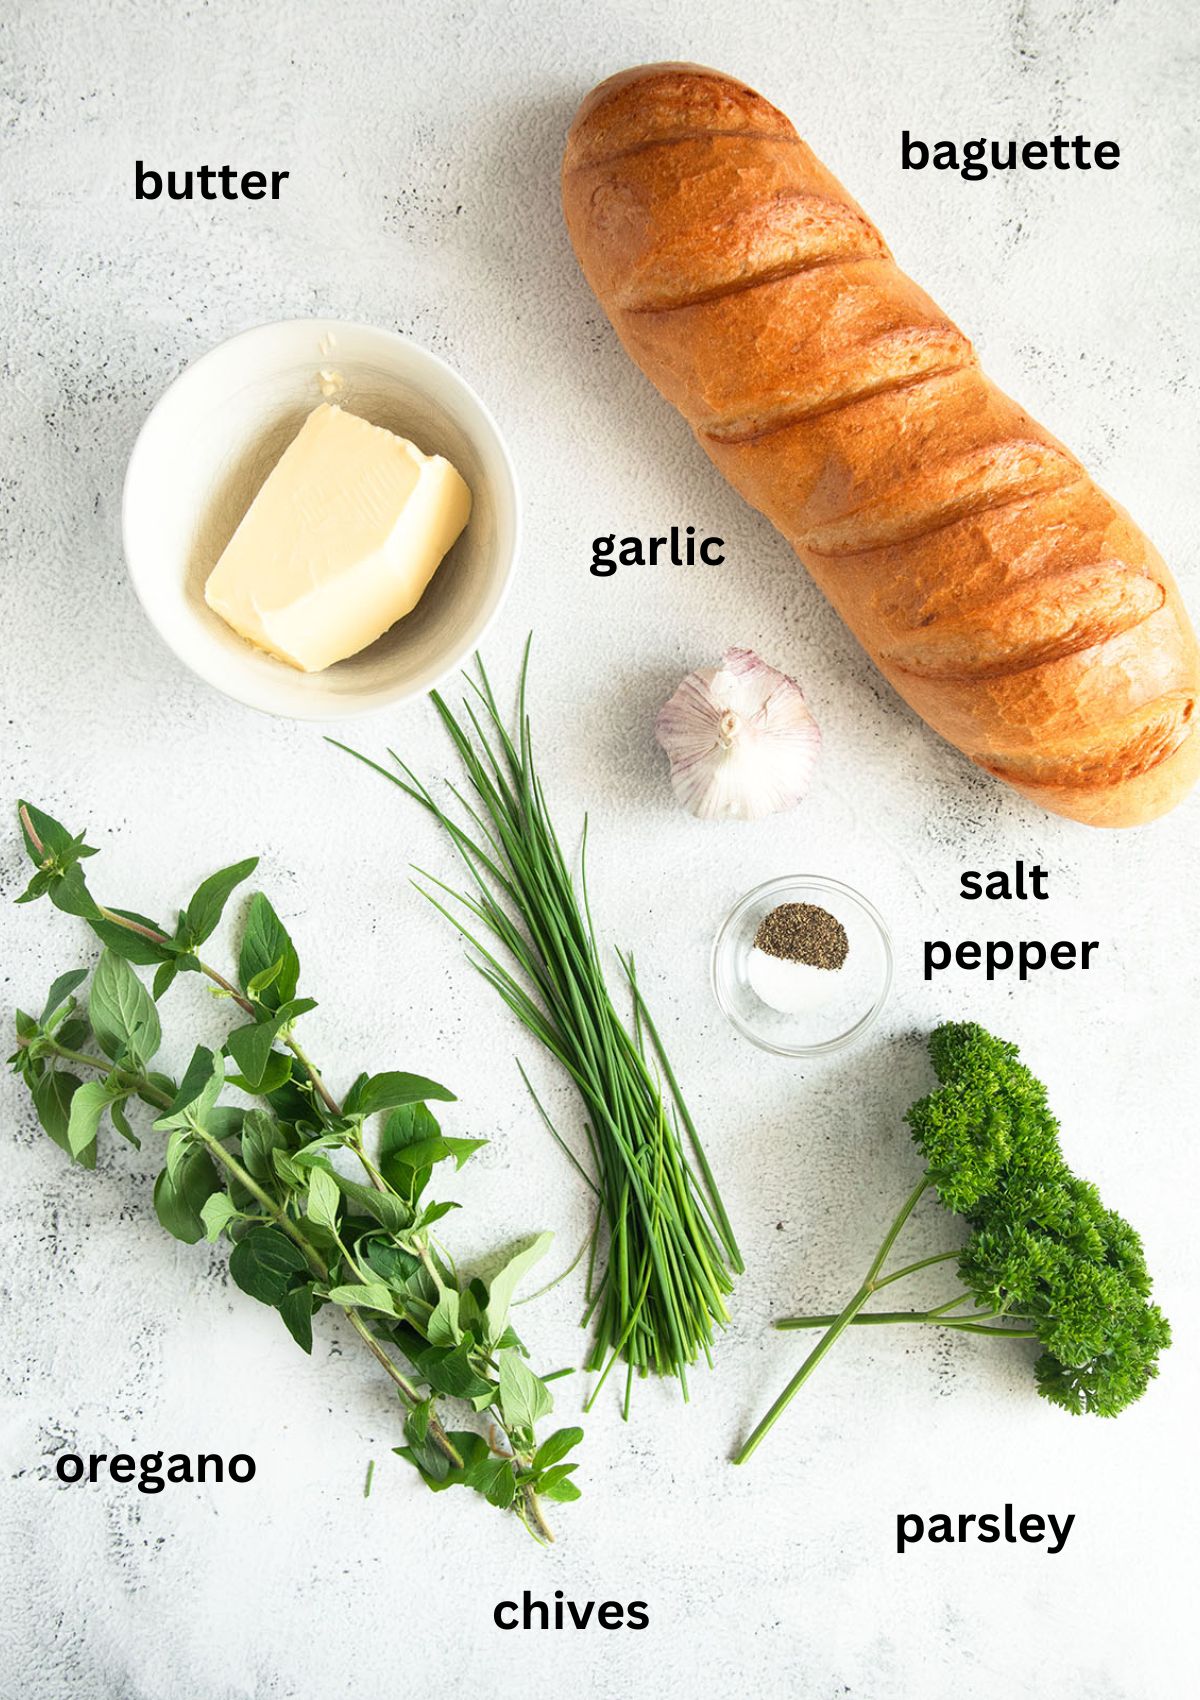 listed ingredients for stuffing baguette with garlic and herb butter.